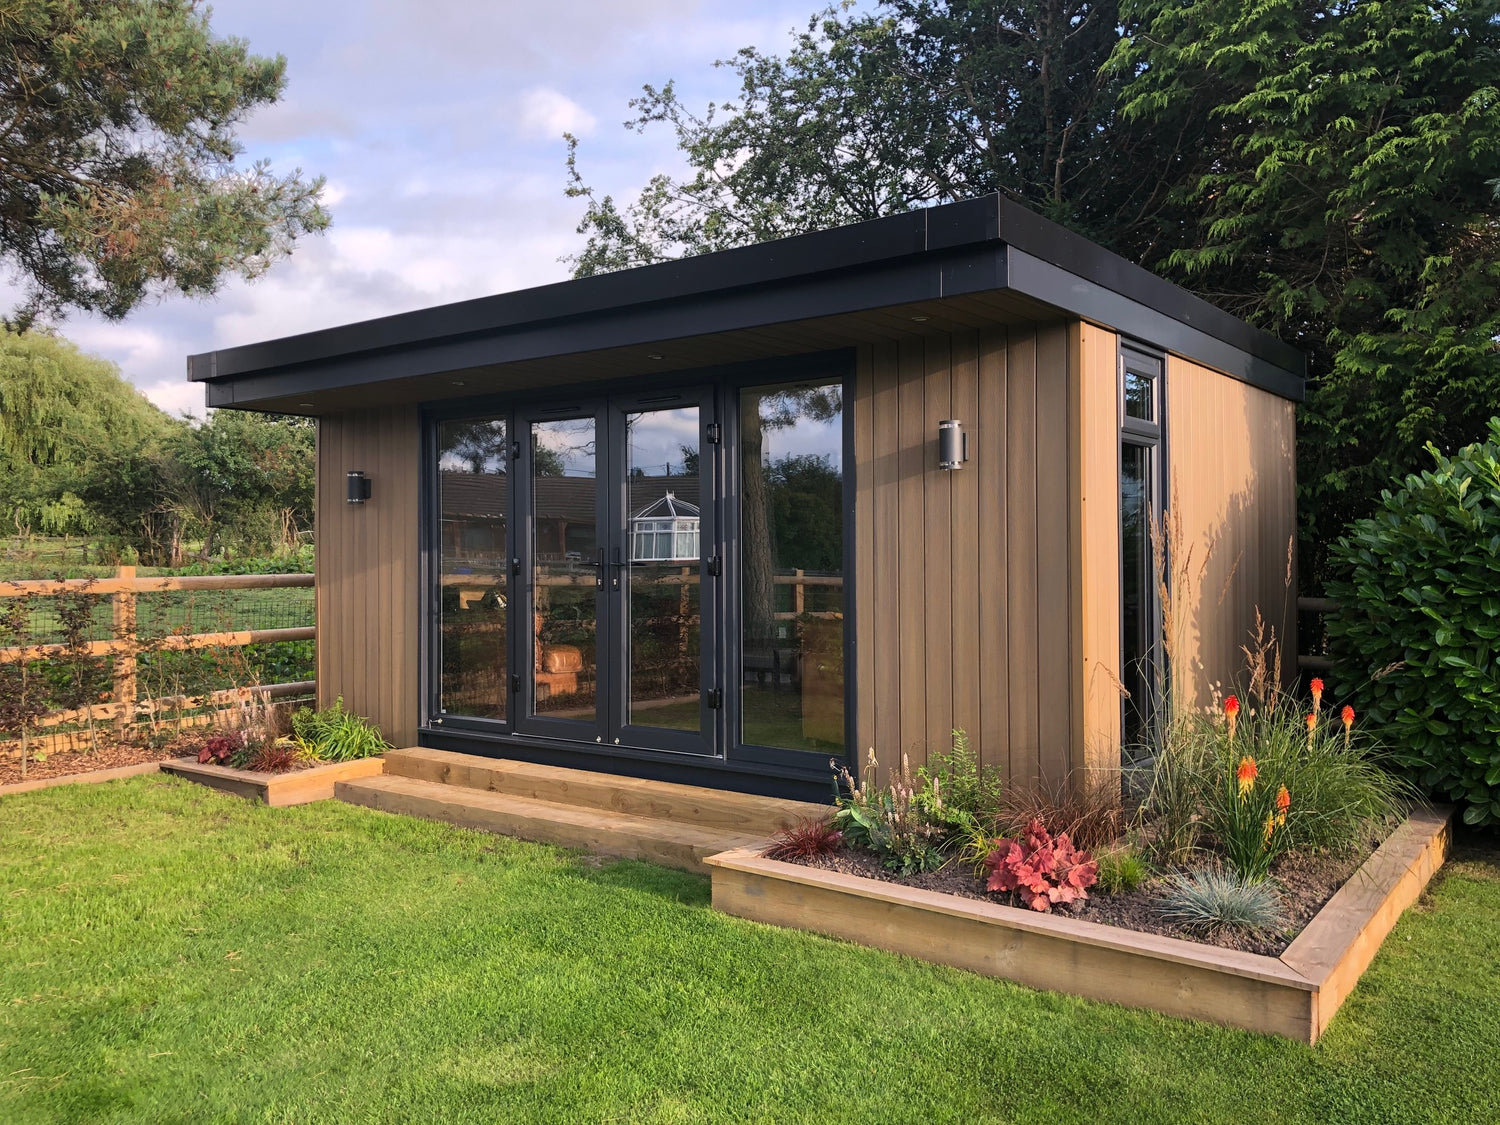 A contemporary garden room office in north wales with garden planters